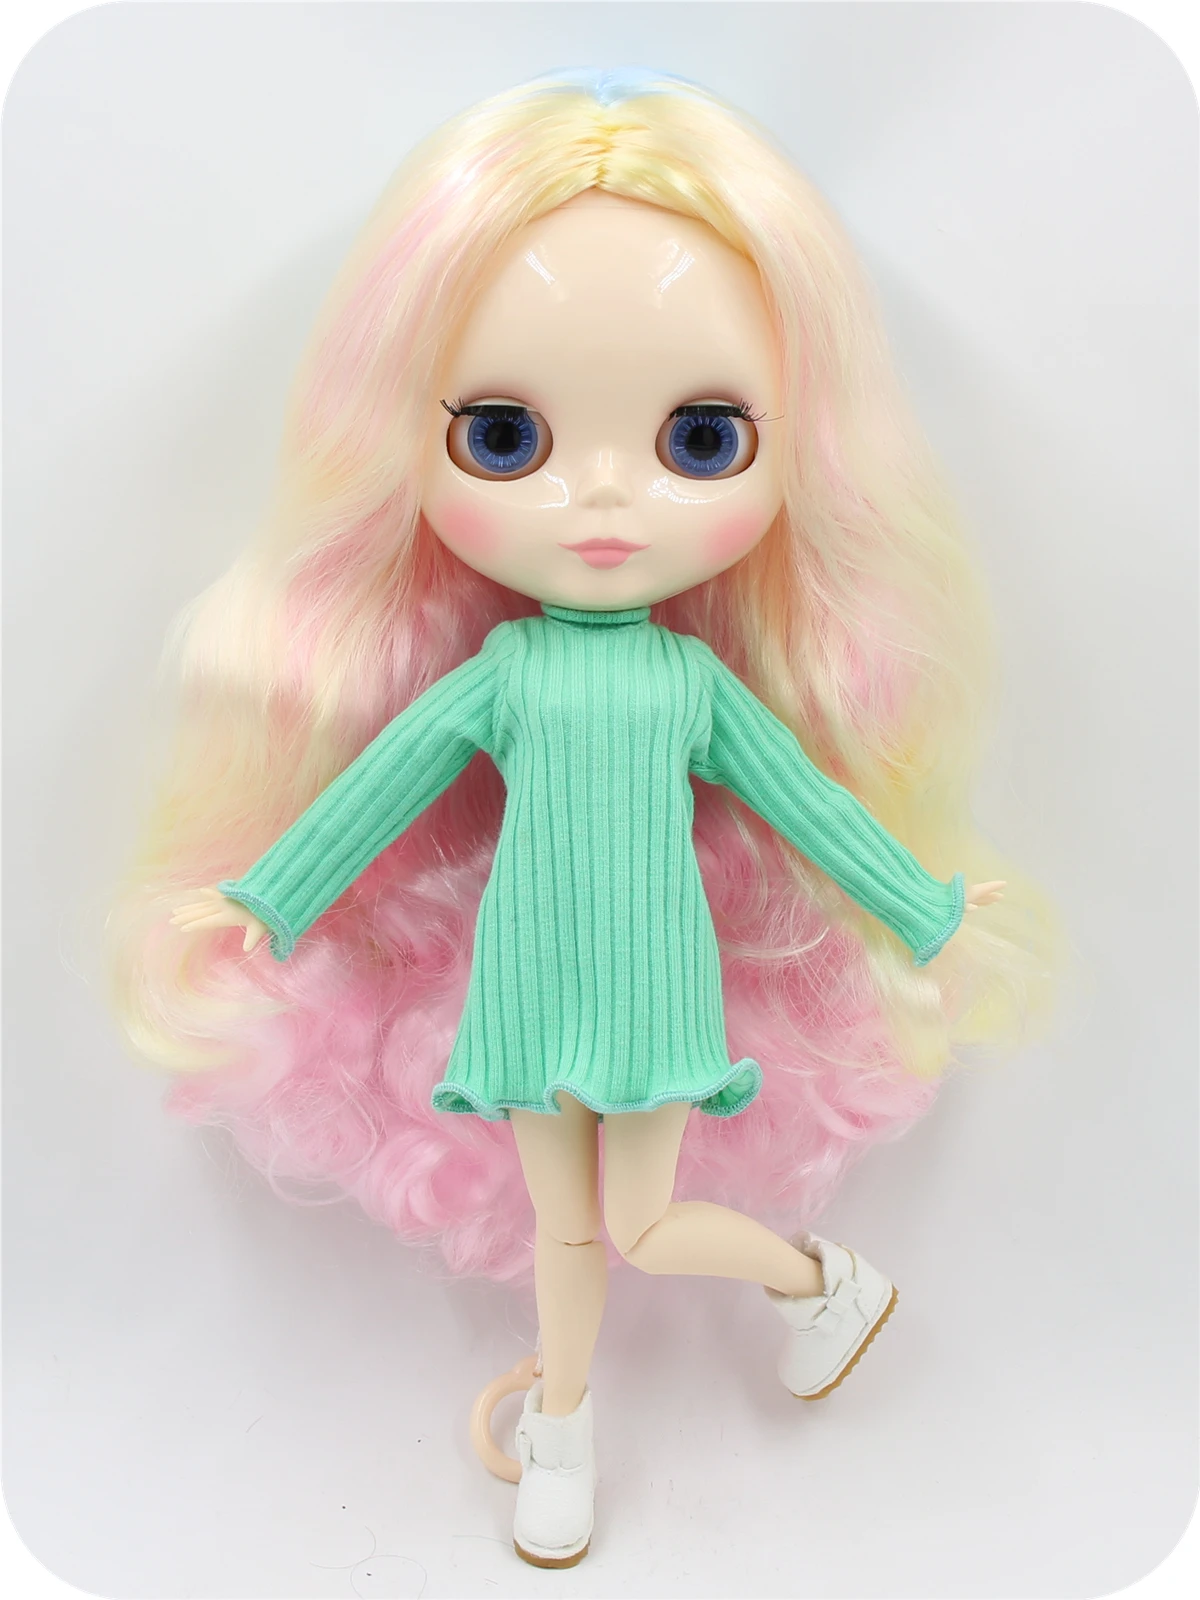 Neo Blythe Doll with Multi-Color Hair, White Skin, Shiny Face & Jointed Body 2